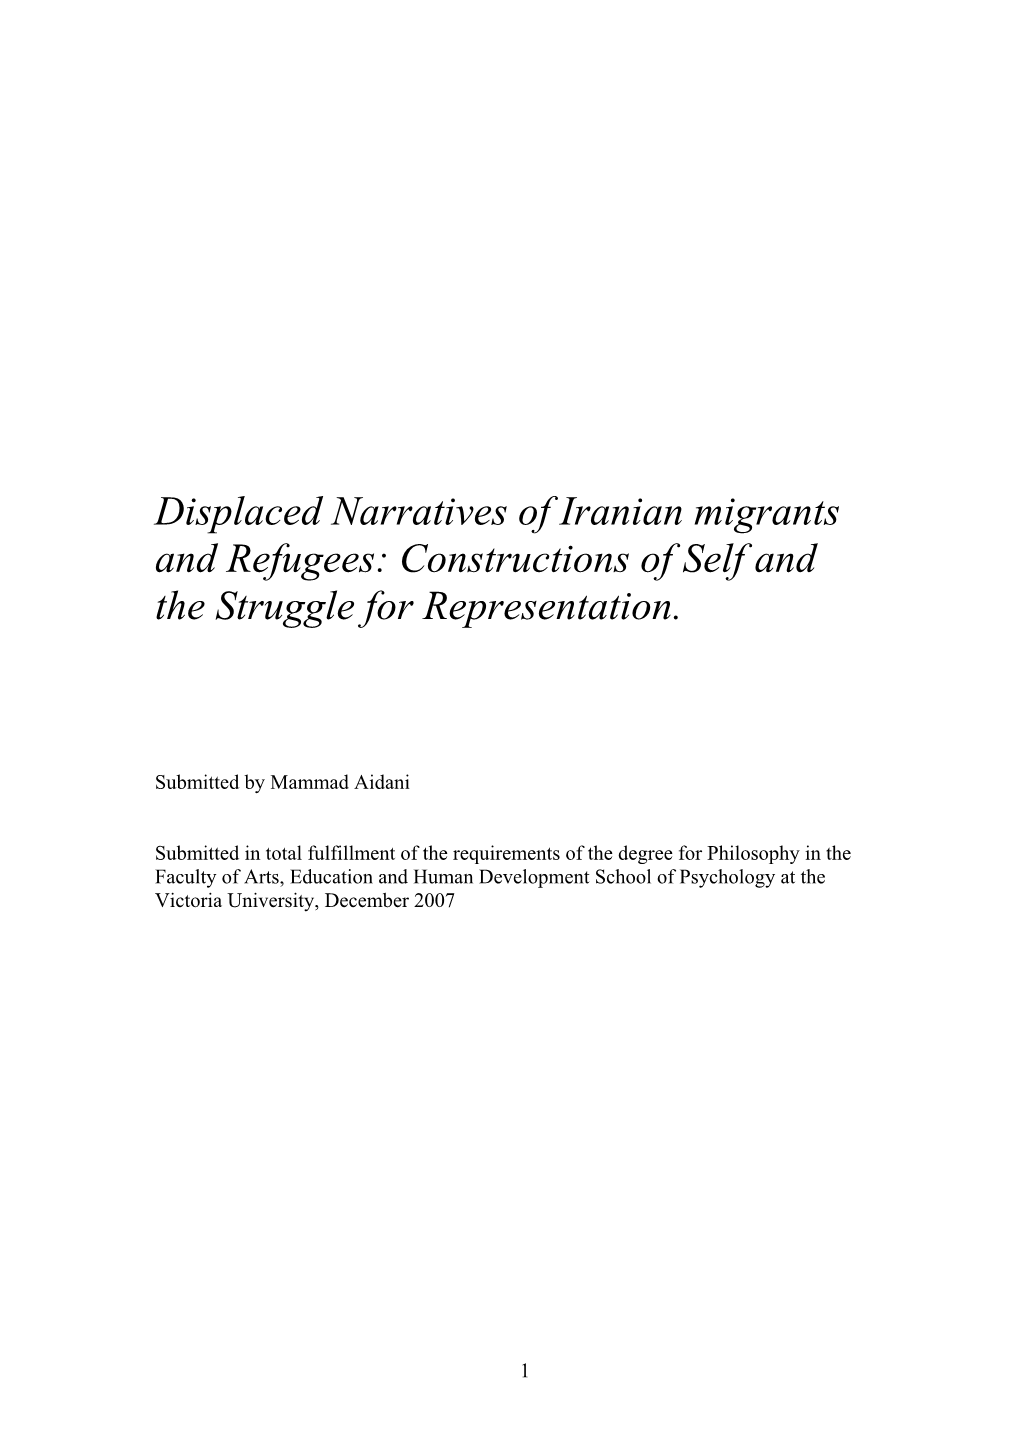 Displaced Narratives of Iranian Migrants and Refugees: Constructions of Self and the Struggle for Representation